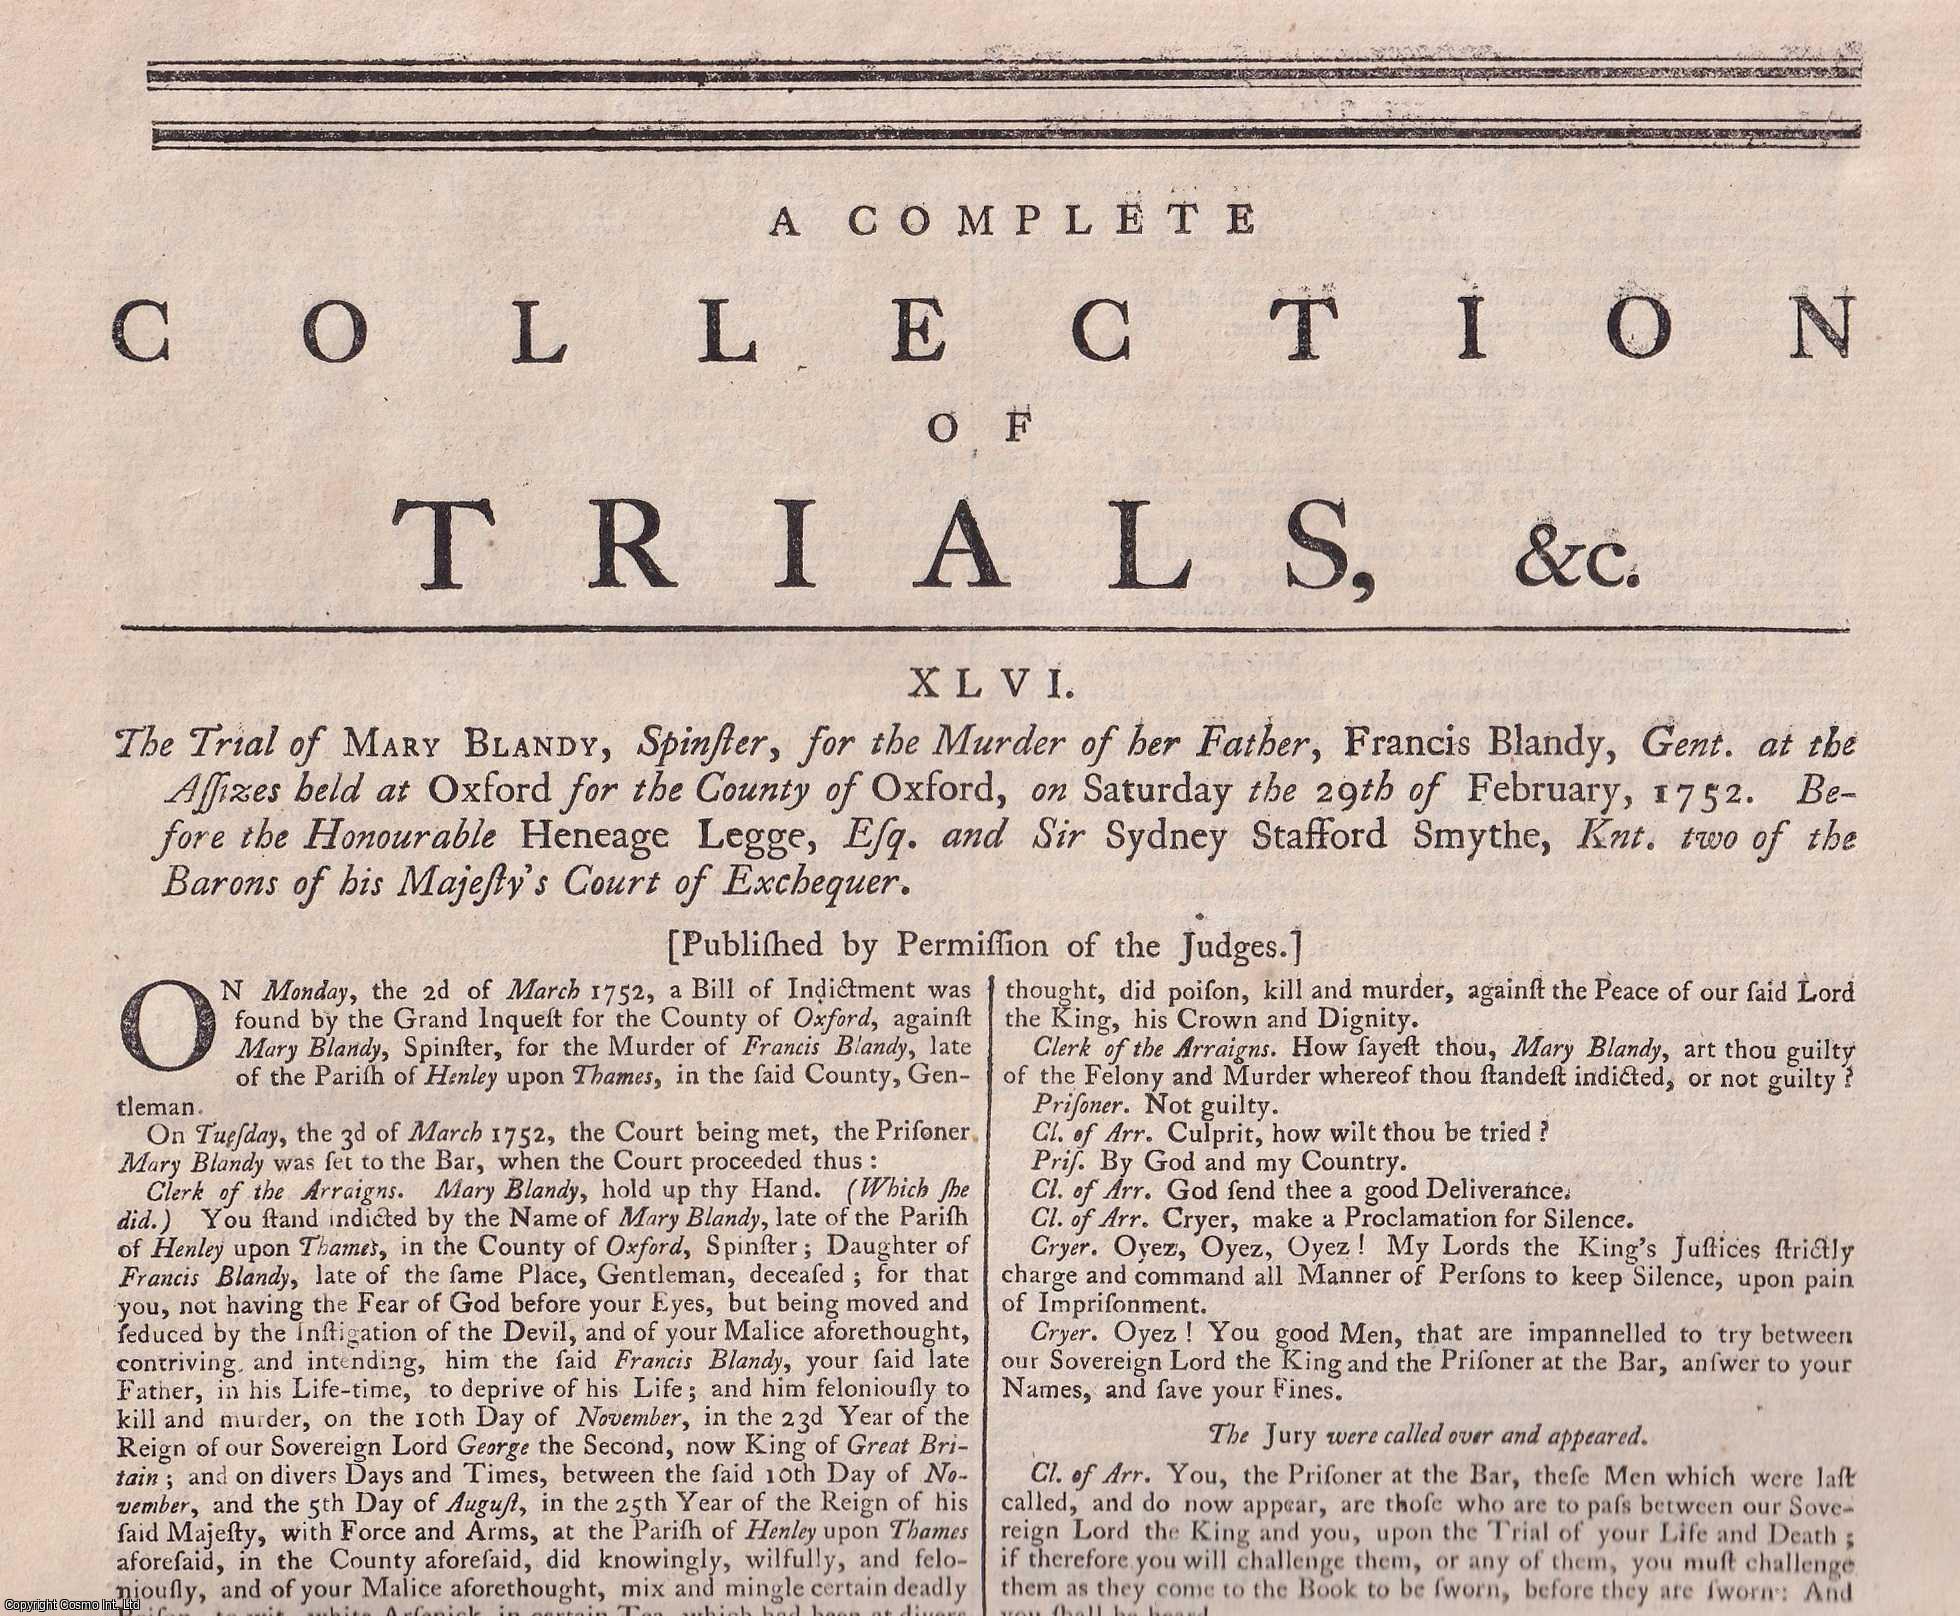 [Trial] - The Trial of Mary Blandy, Spinster, for the Murder of her Father, Francis Blandy, gent. at the Assizes held at Oxford... AD 1752. An original article from the Collected State Trials.